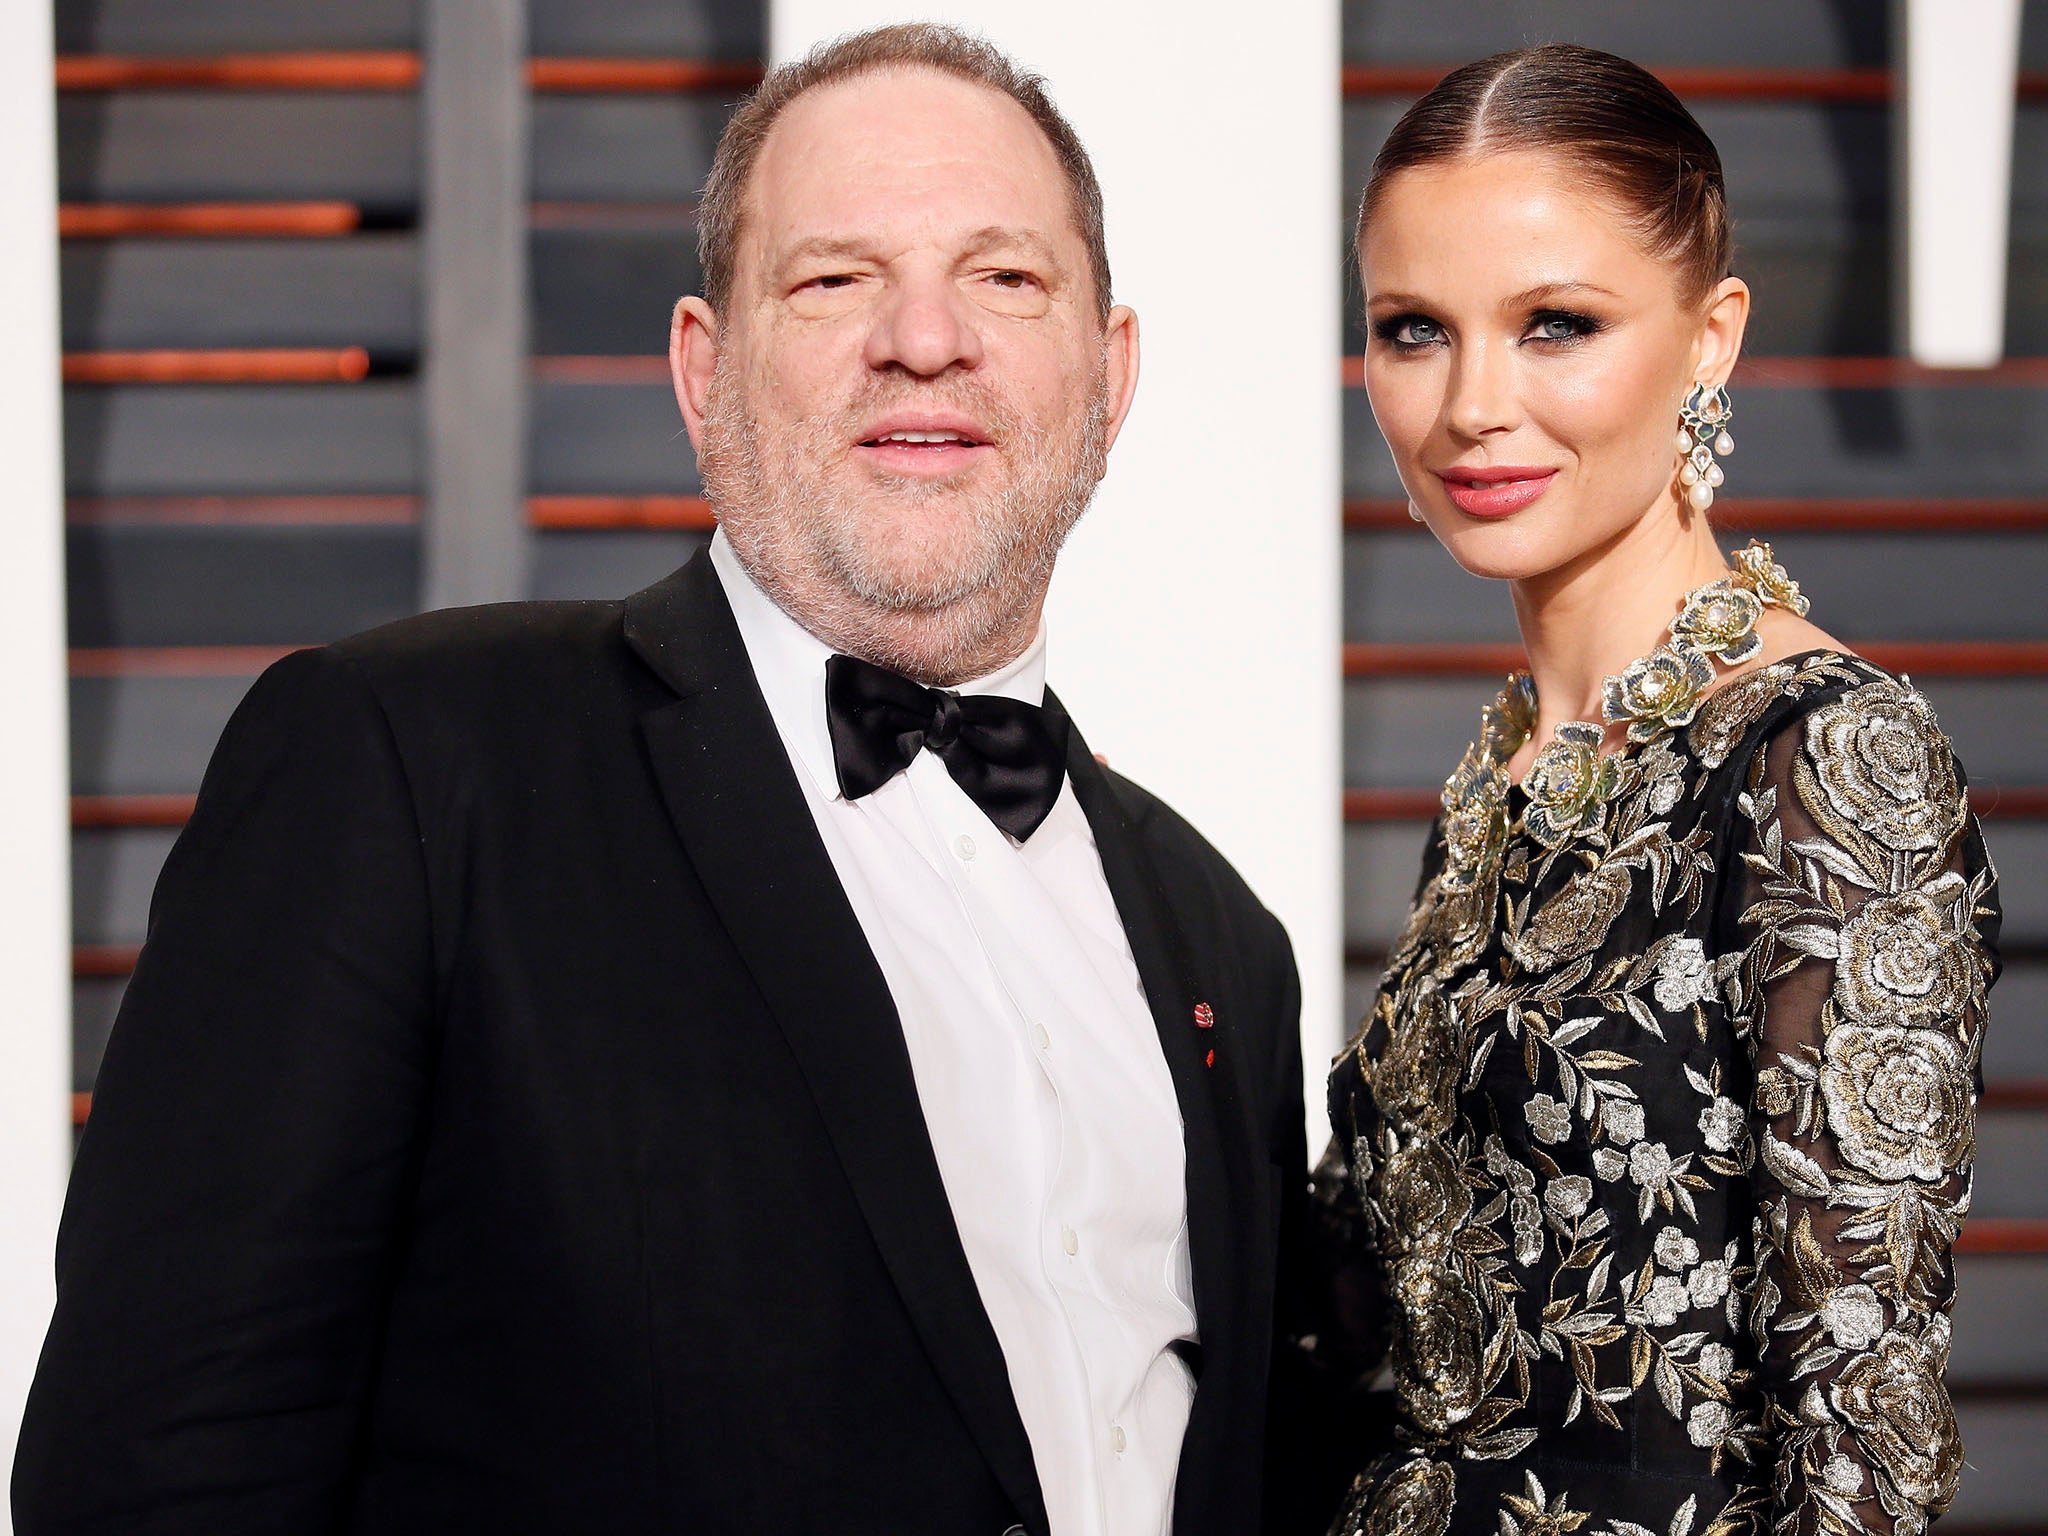 Harvey Weinstein with his wife, designer Georgina Chapman. Following the allegations made against him, she announced she was going to leave him